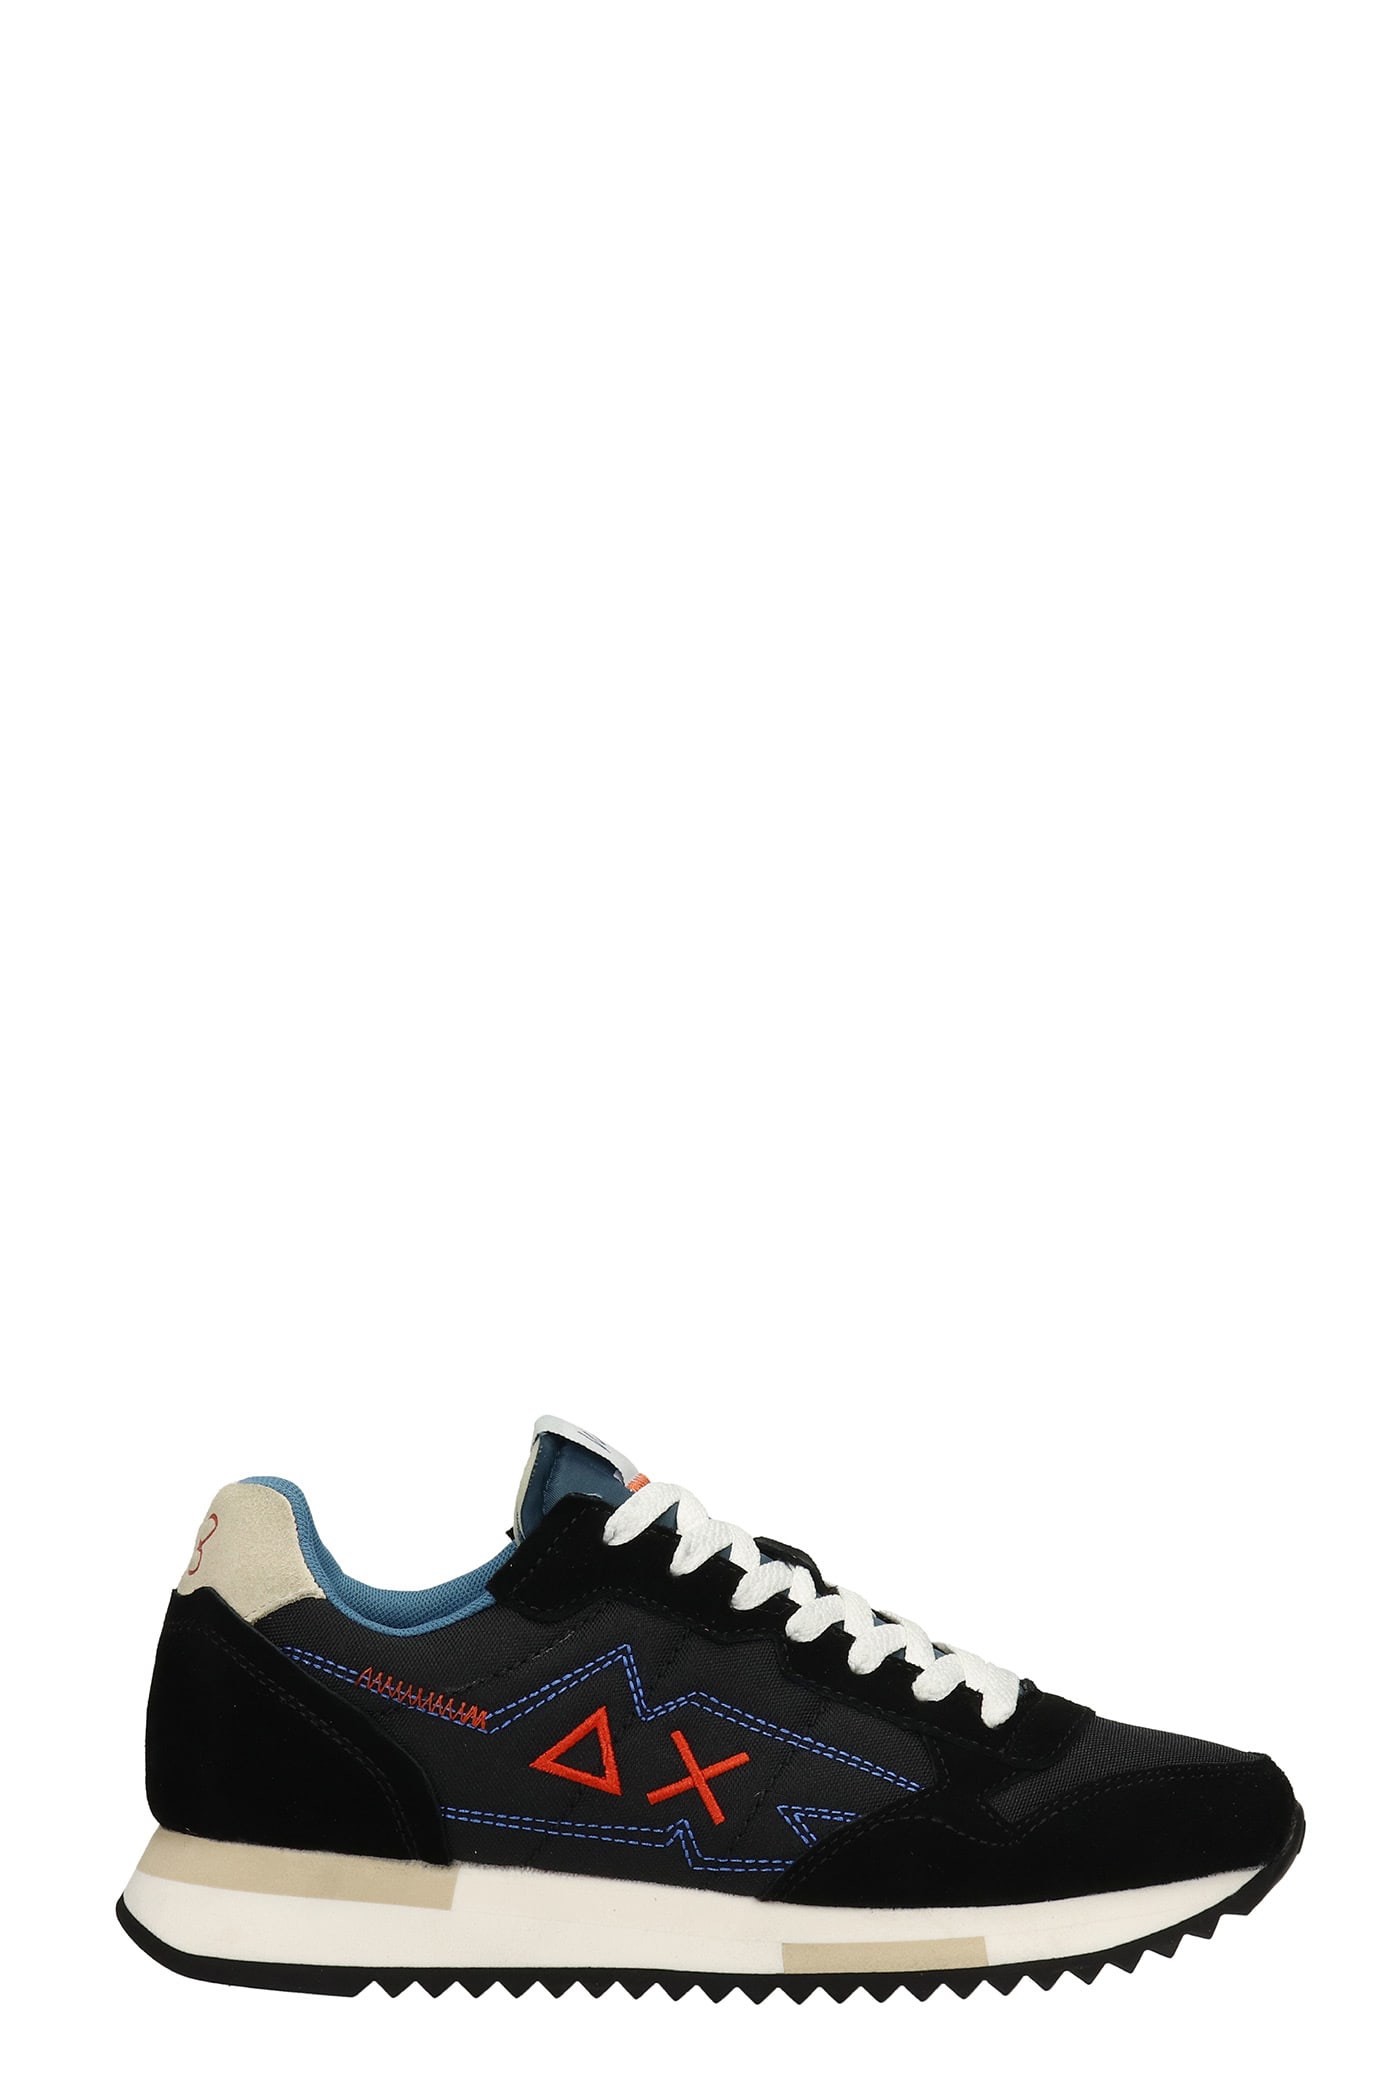 Sun 68 Uncle Niki Sneakers In Black Suede And Fabric